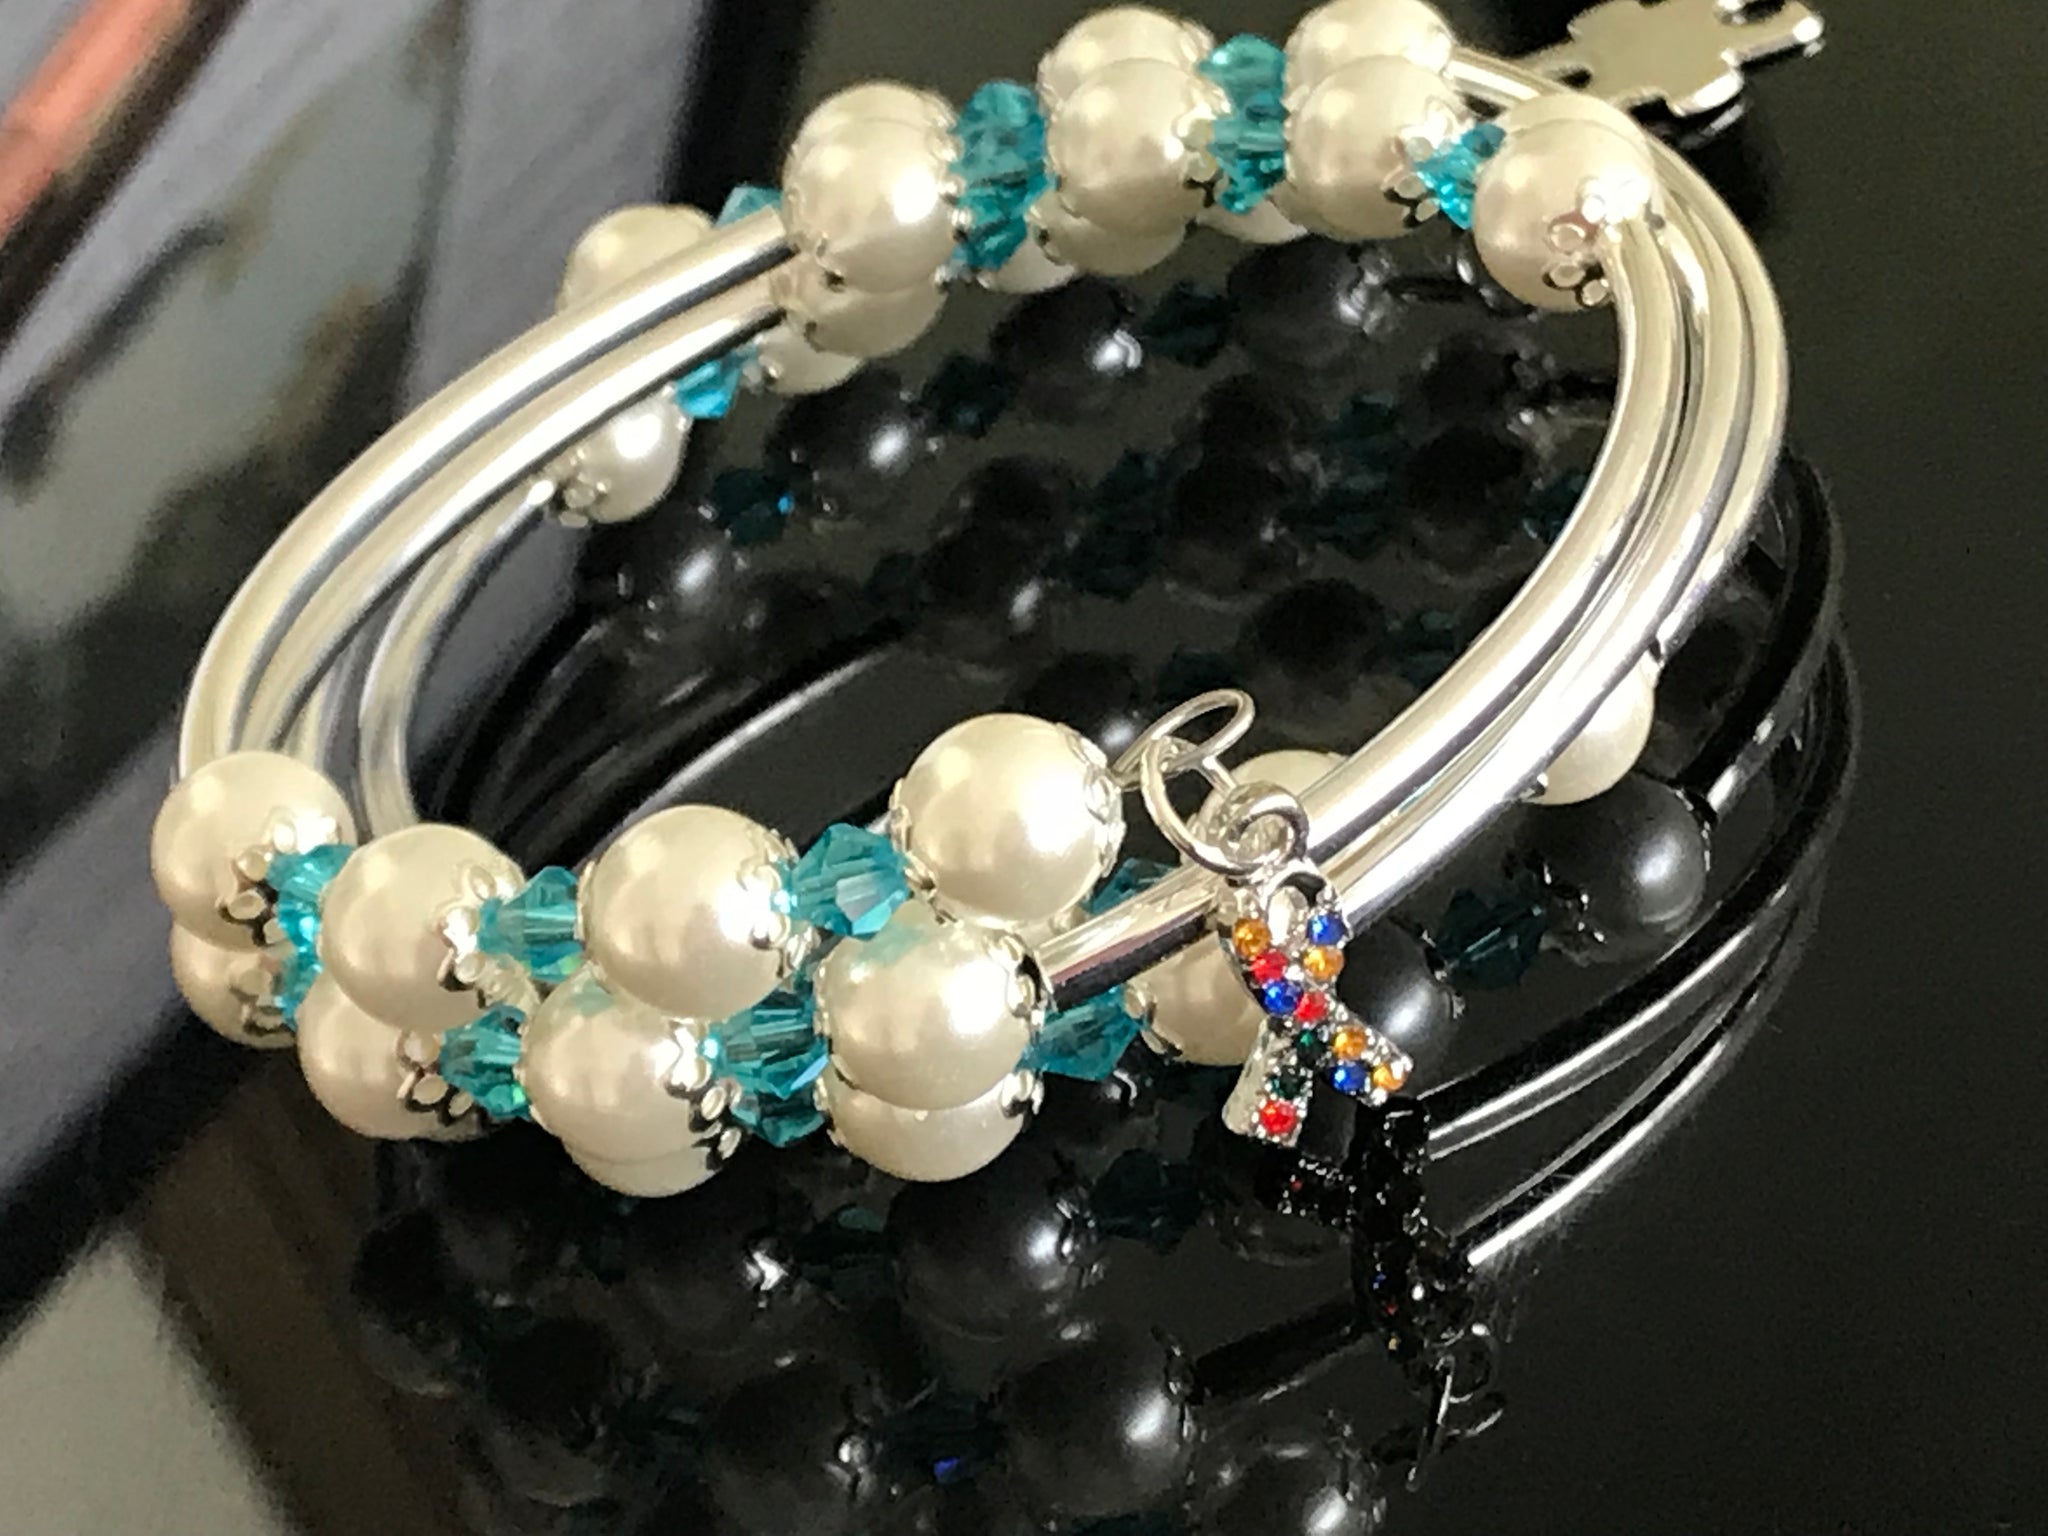 Autism awareness white glass pearls, Swarovski with silver noodle beads on a memory wire bracelet